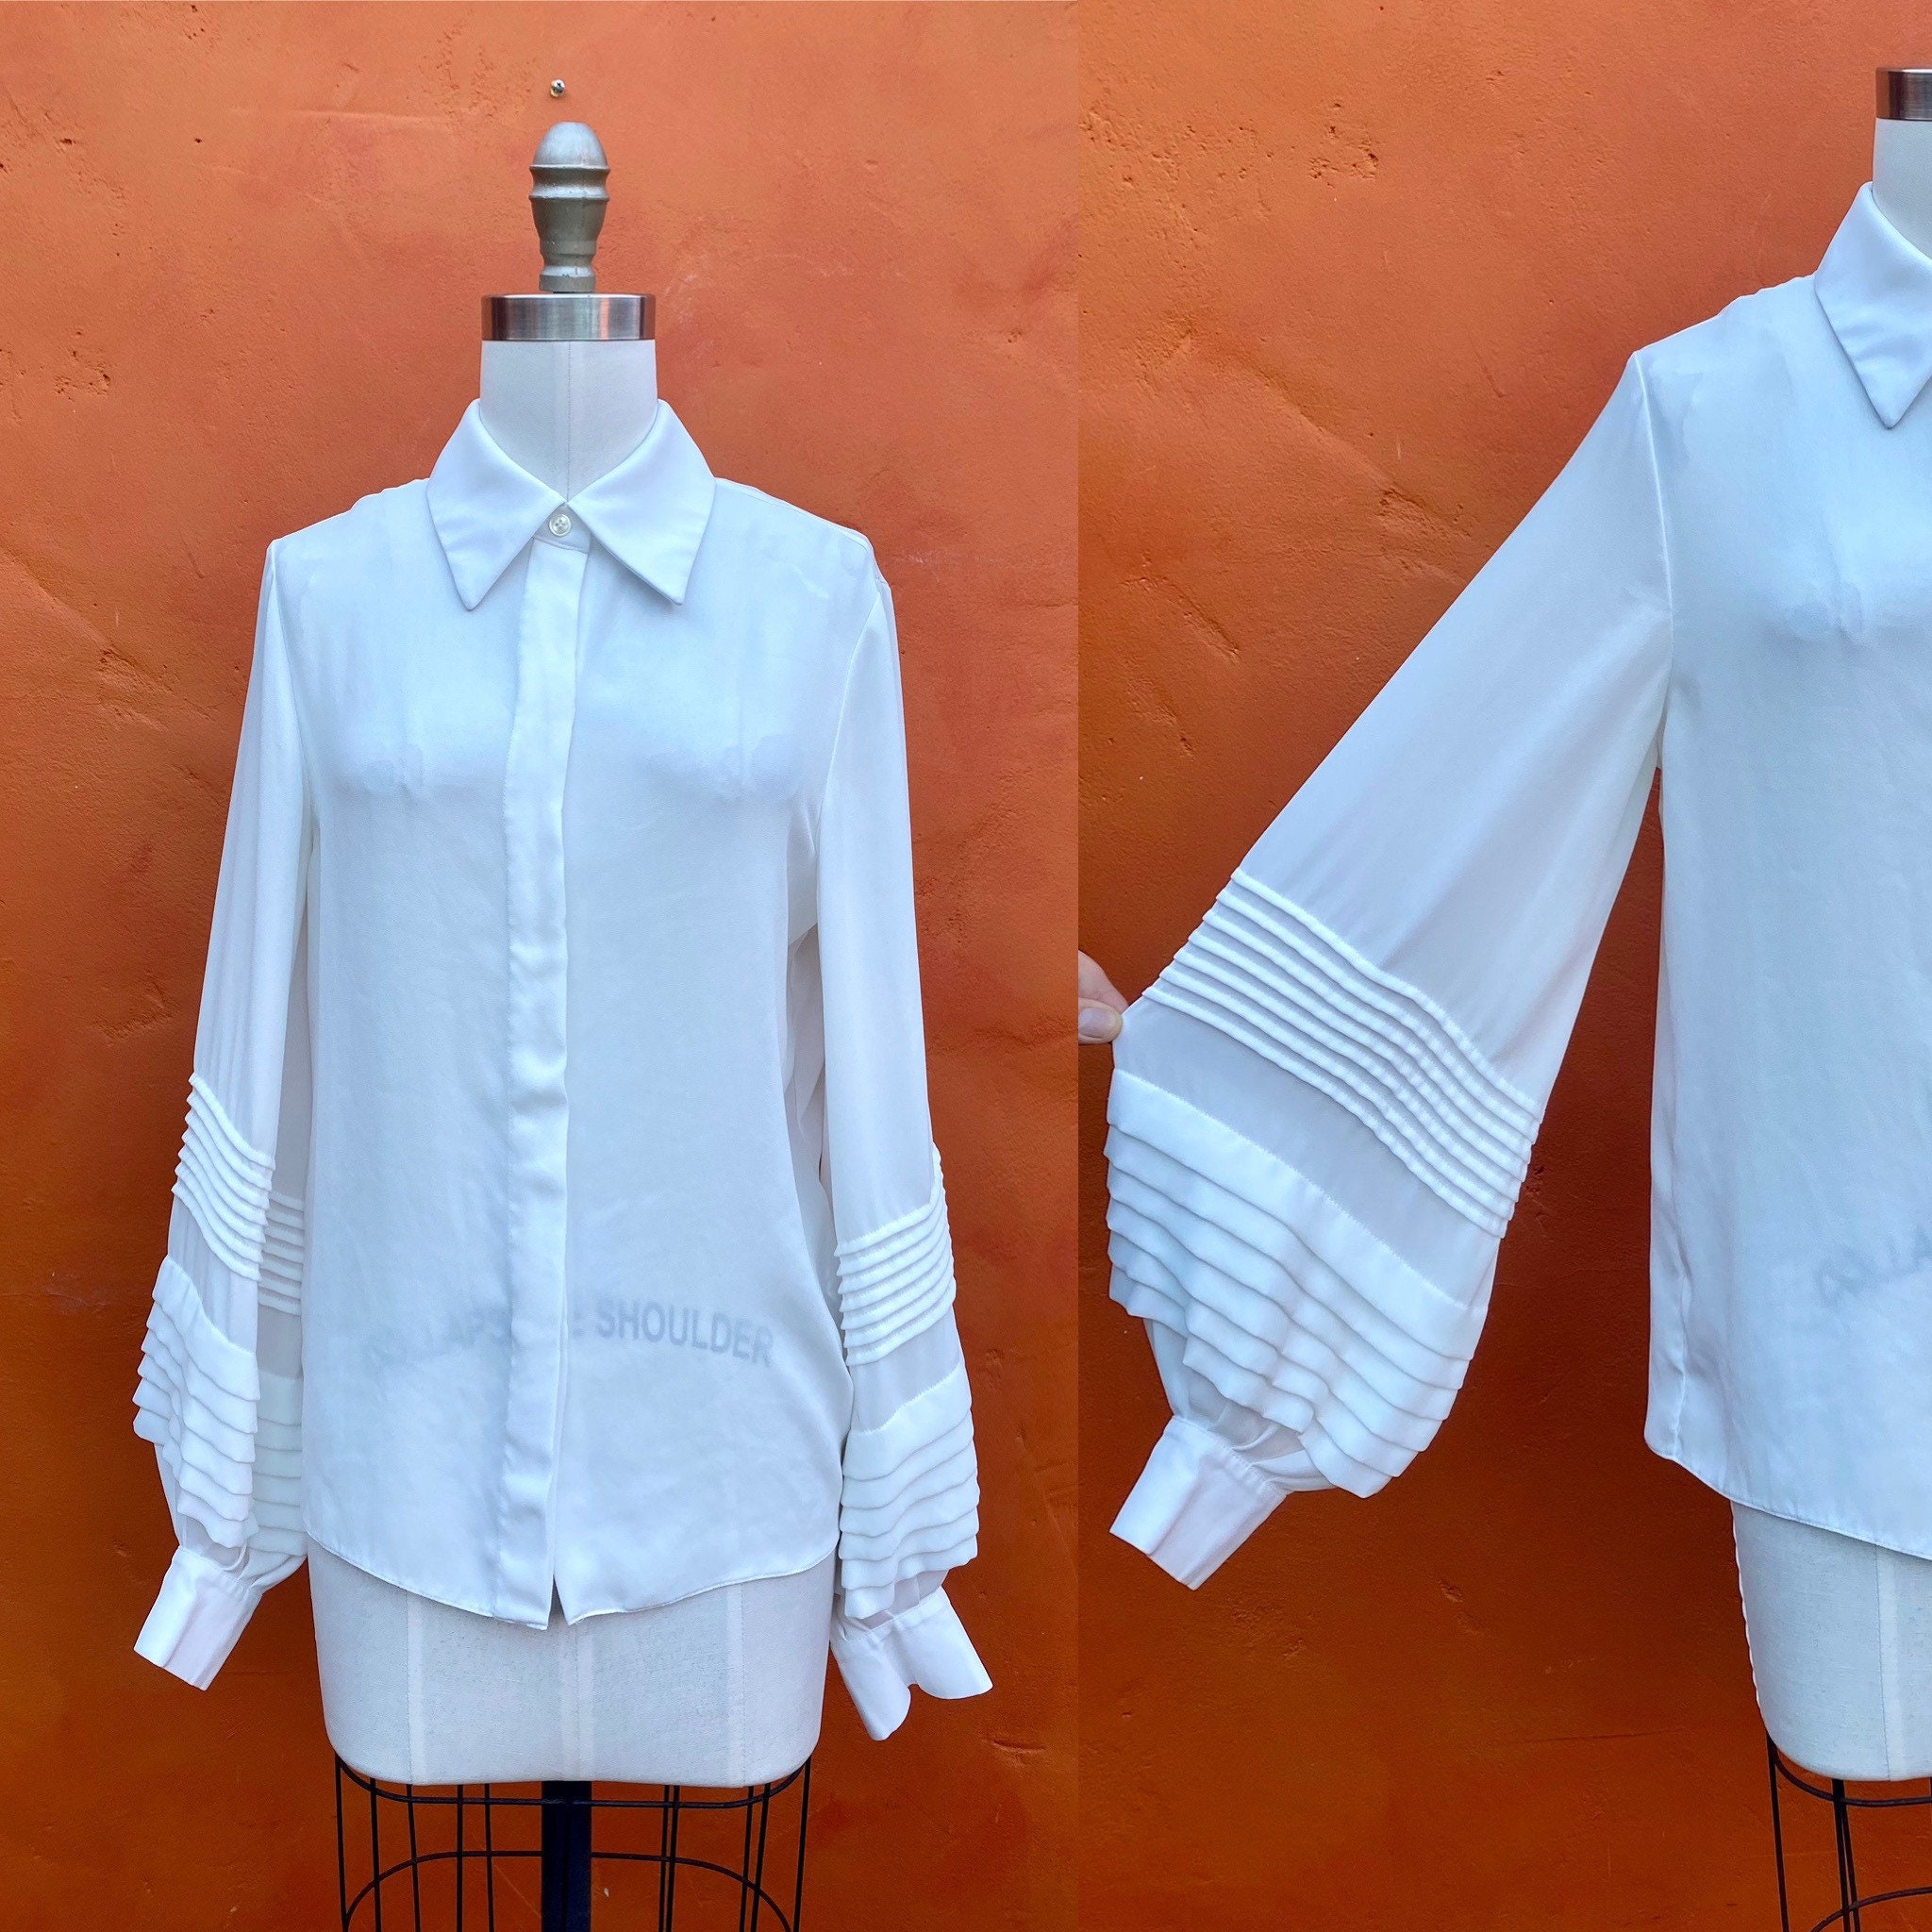 Louis Vuitton White Blouse with Black Trim Ruffled Collar — The Posh Pop-Up